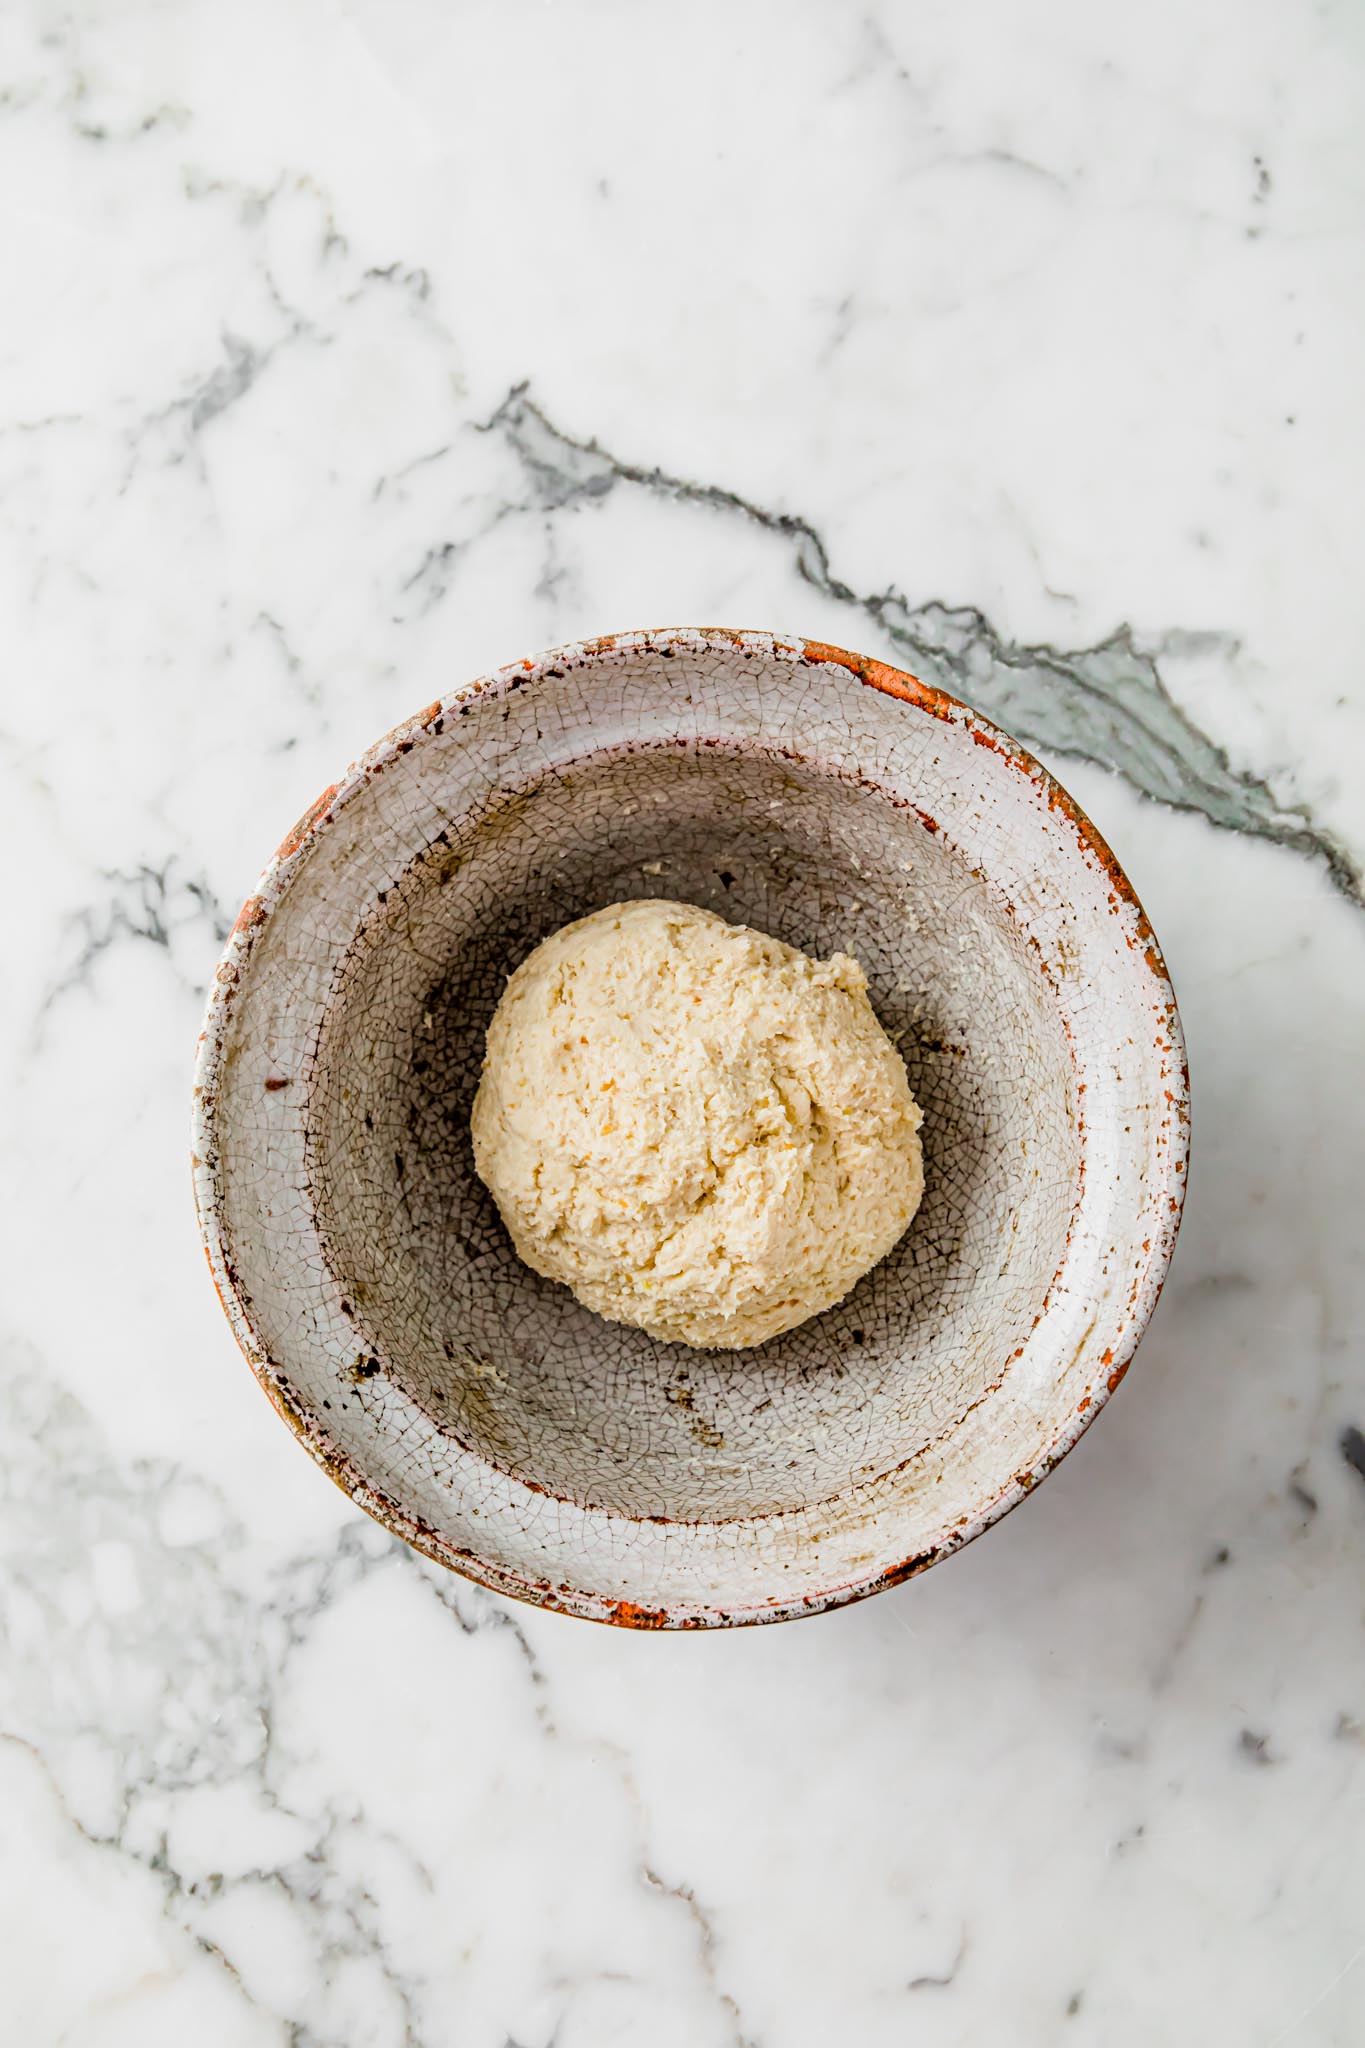 Dough for Gluten-free Naan Bread in a rustic bowl on a marbled surface